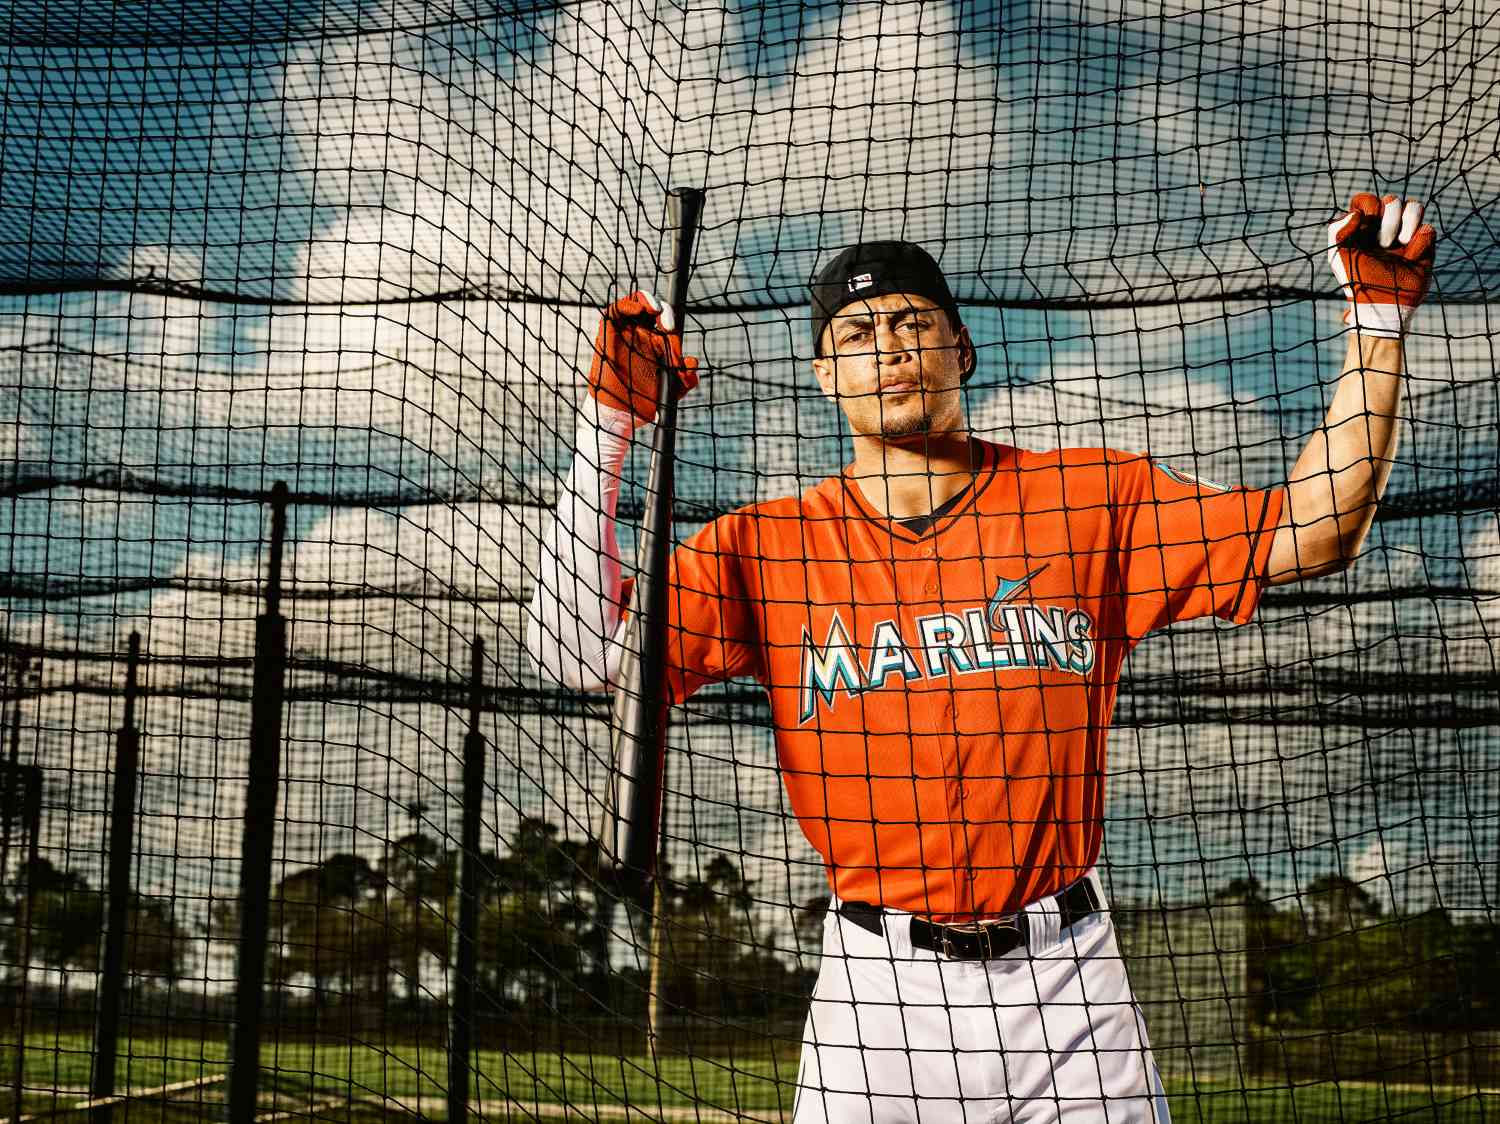 giancarlo stanton contract signed a 13 year with the Miami Marlins.